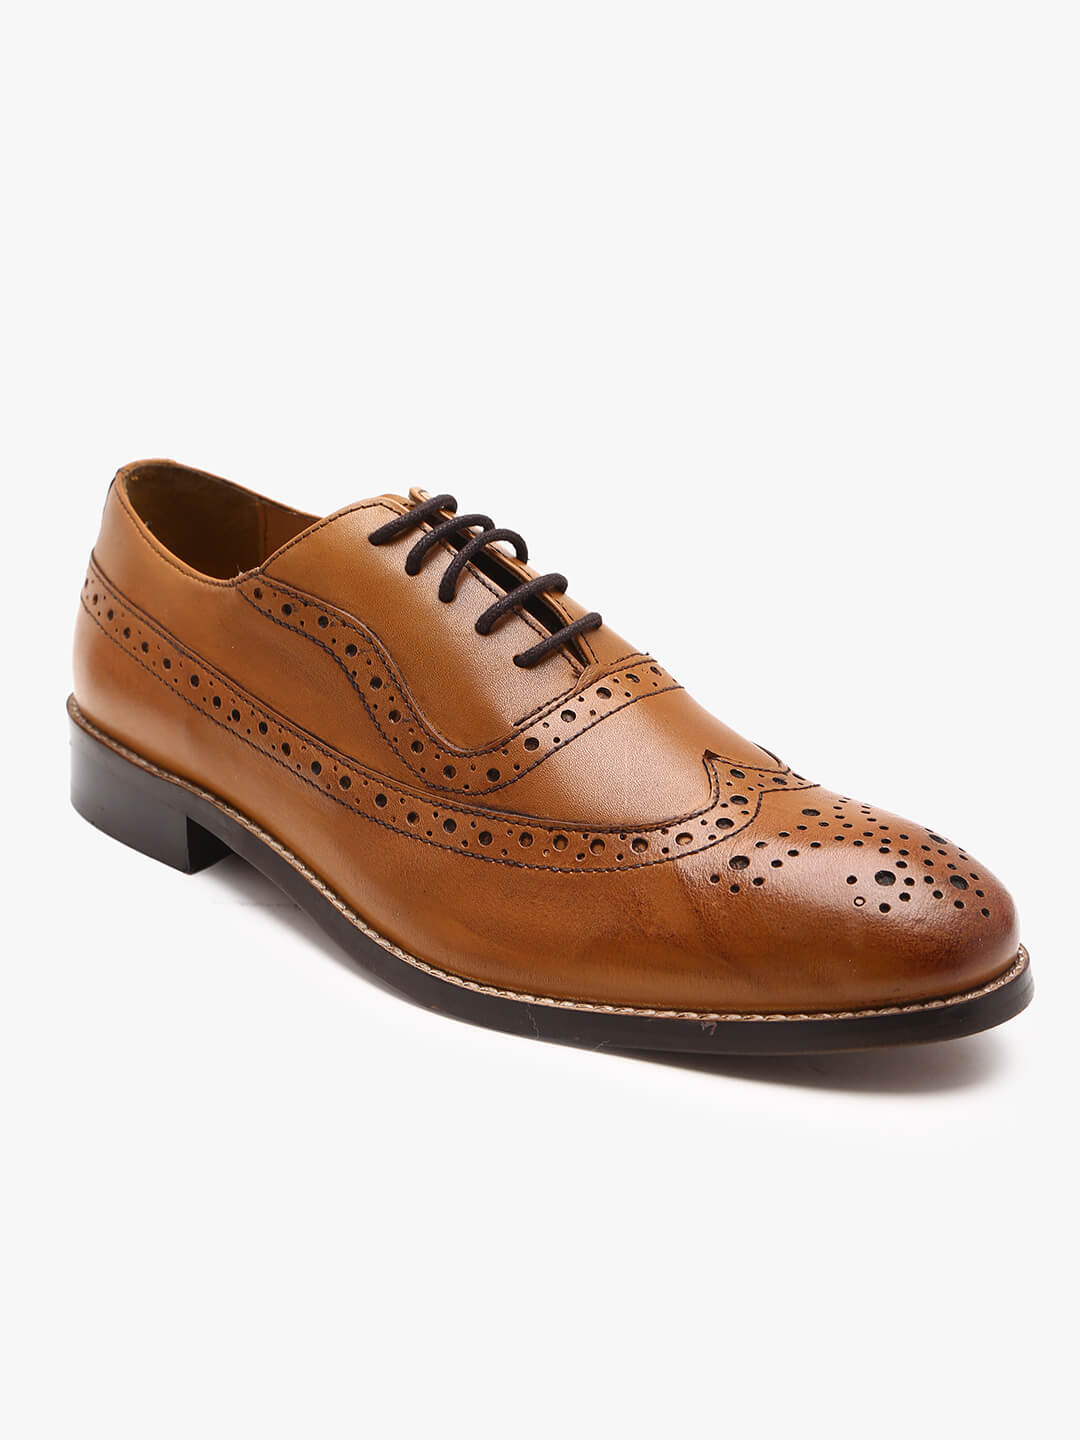 Buy Online Genuine Leather Tan Brogues Shoes Online in India